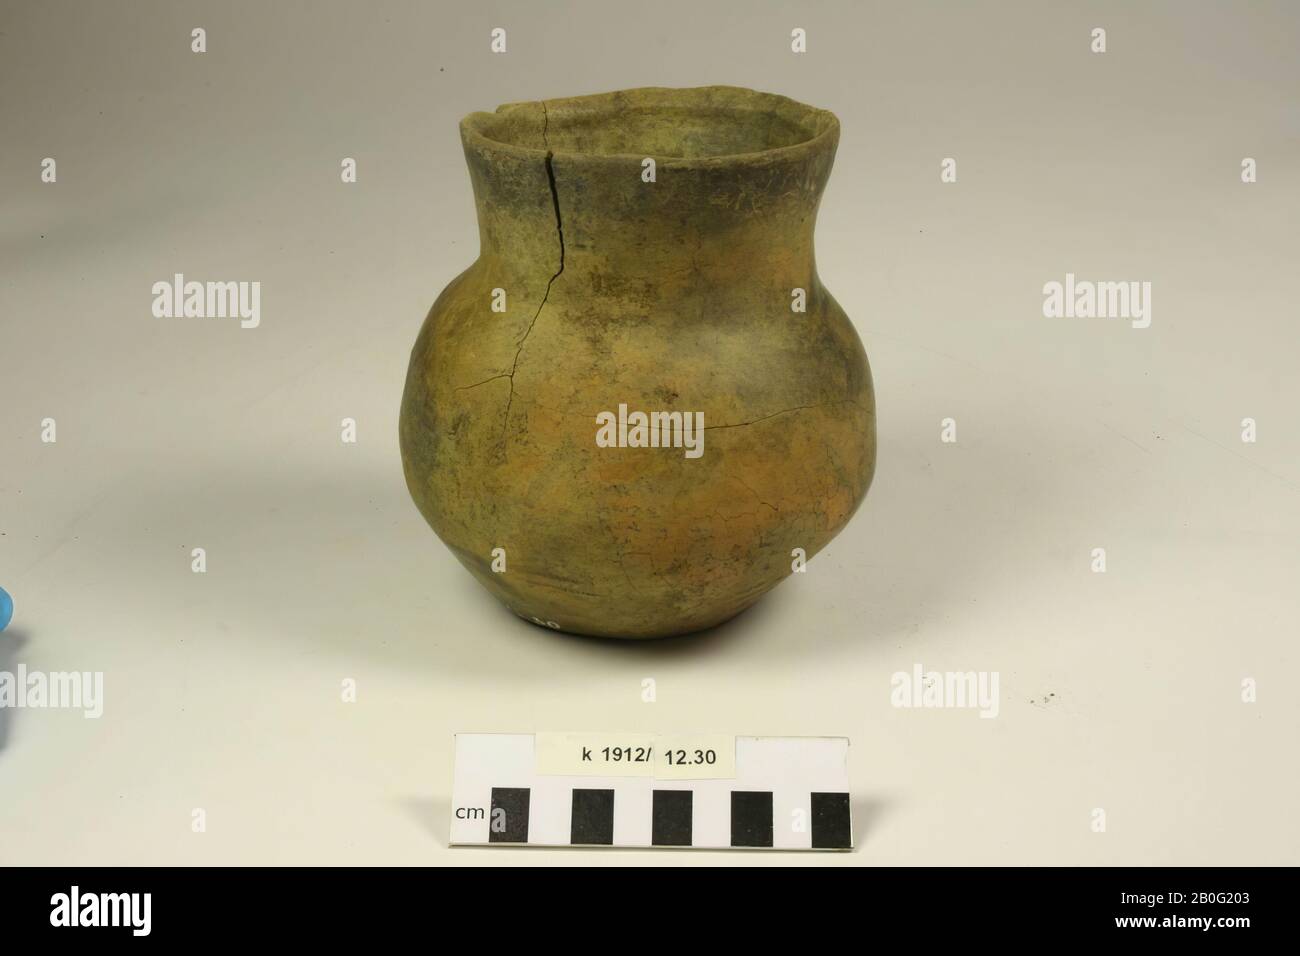 Gallo-Germanic urn of earthenware. Network of cracks. Contains cremated residues, urn, earthenware, h: 15 cm, diam: 14.5 cm, prehistory -1200 Stock Photo